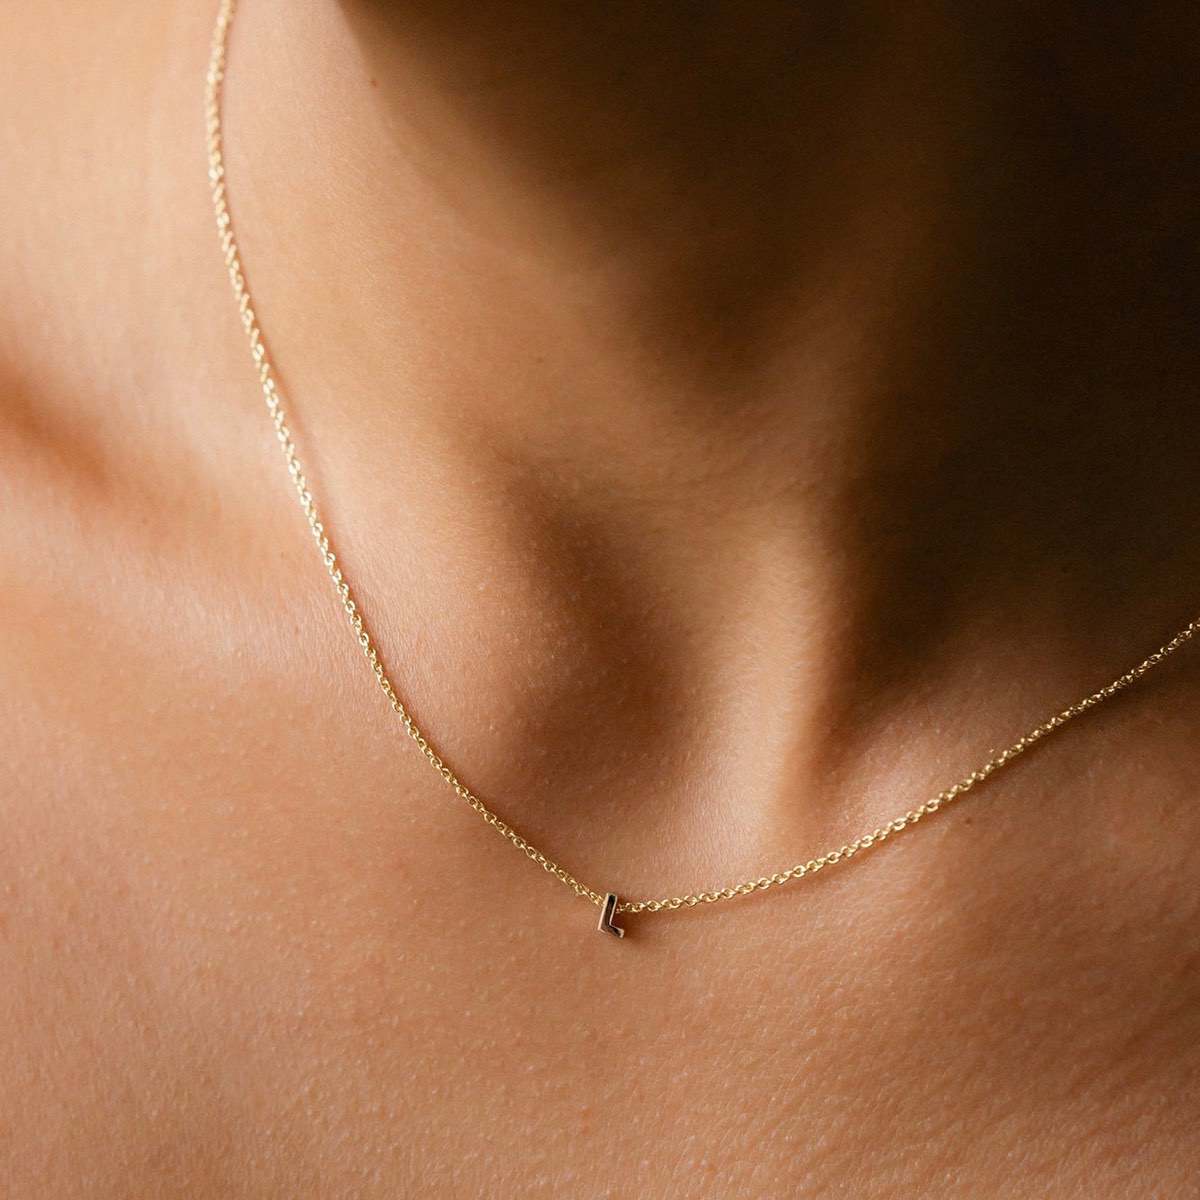 Hand finished solid gold letter necklace: Close up of a model wearing our beautiful 9ct yellow gold Tiny Letter L Charm Necklace with a 40cm cable chain